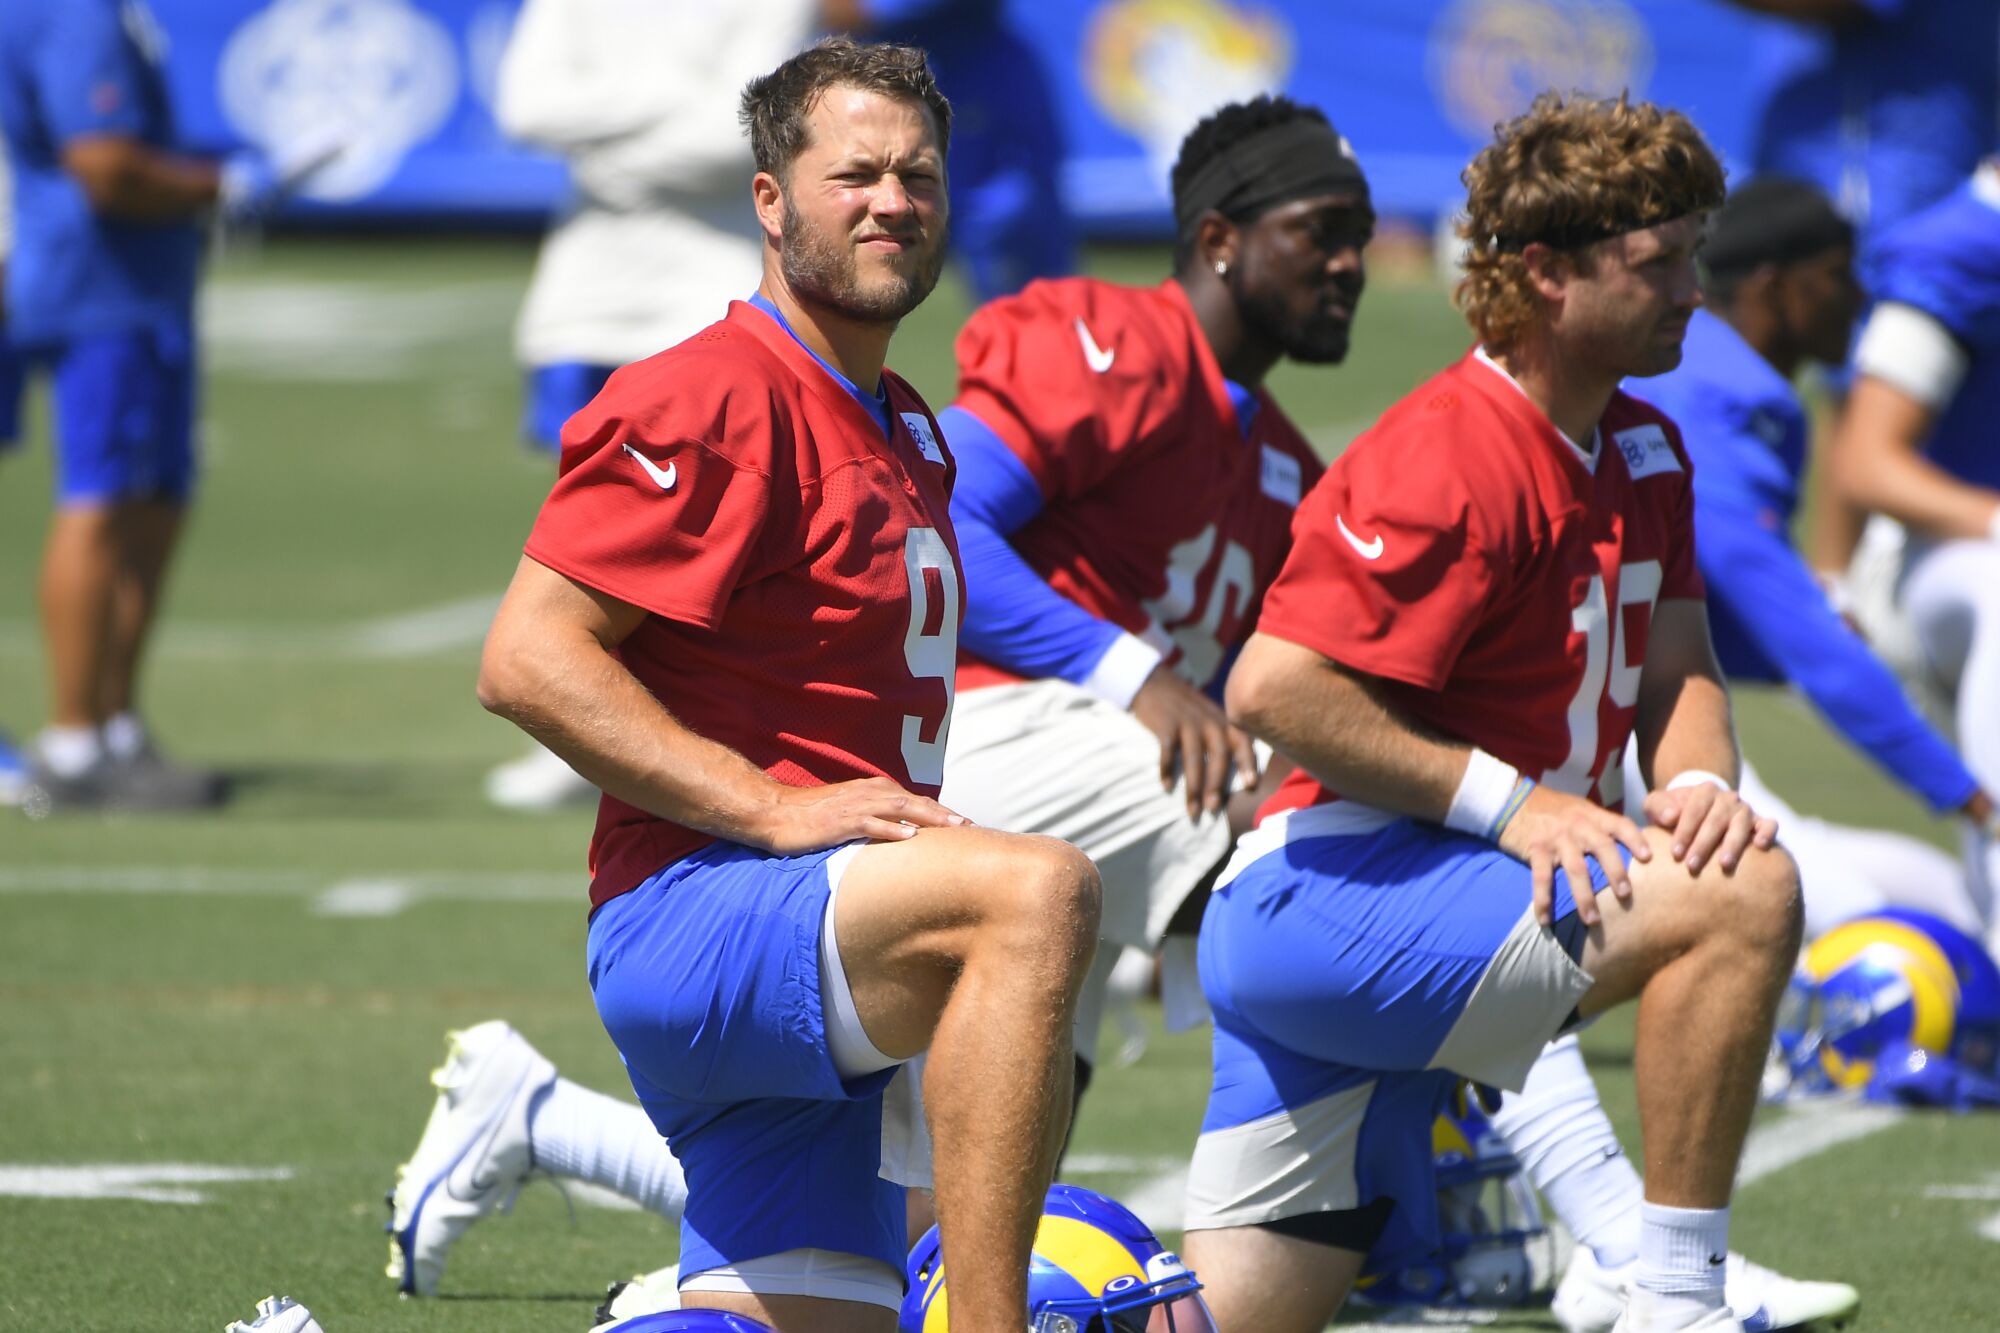 Rams quarterback Matthew Stafford stretches next to Bryce Perkins and Devlin Hodges during training camp.